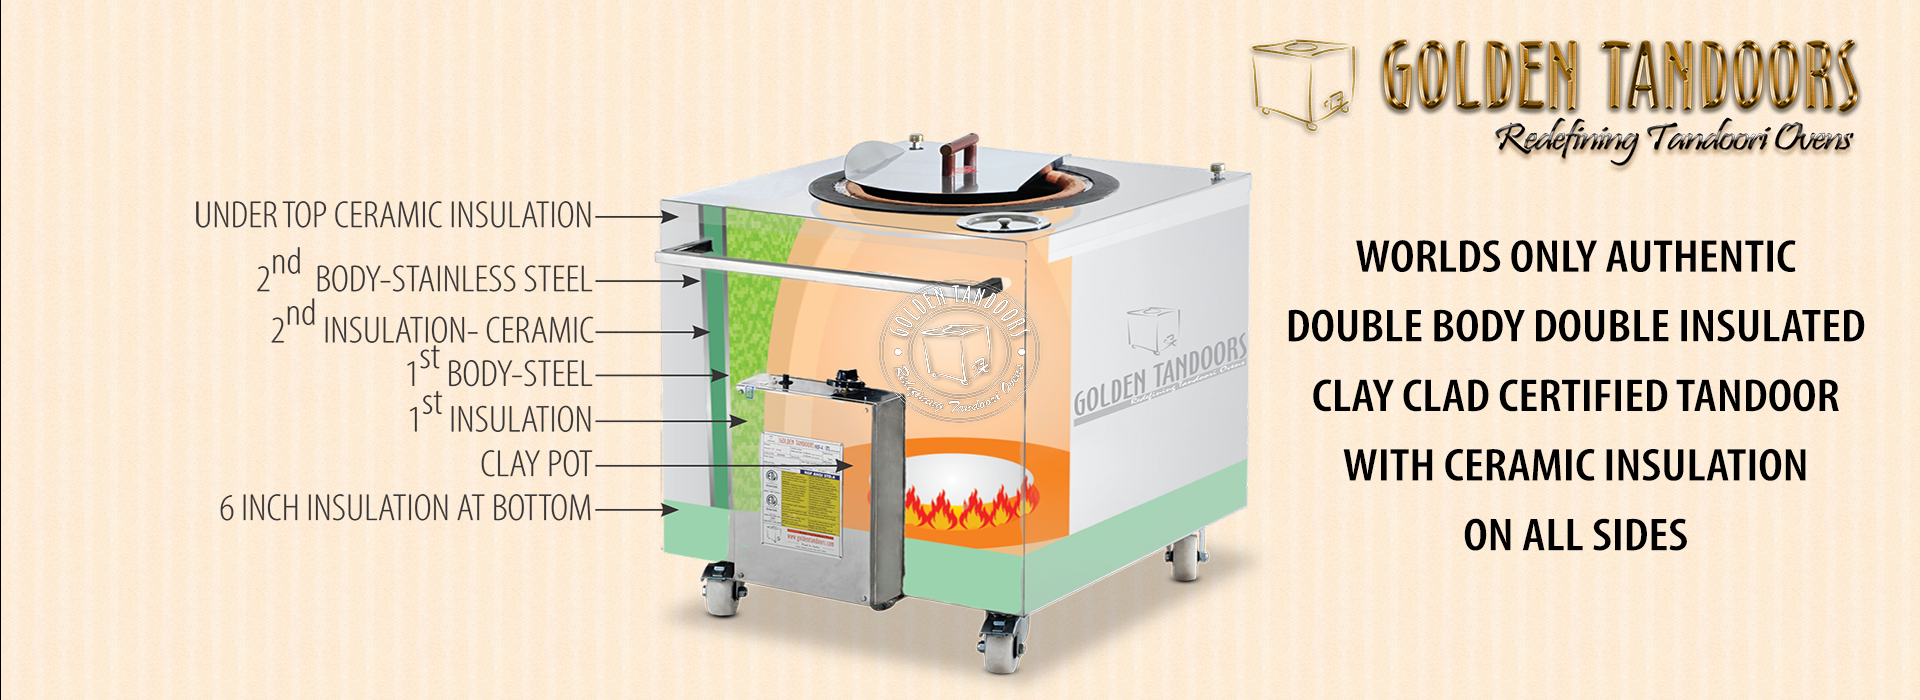 WORLDS ONLY AUTHENTIC GAS TANDOOR OVEN DULY CERTIFIED FOR GAS SAFETY AND SANITAION DOUBLE BODY DOUBLE INSULATED WITH CERAMIC INSULATION ON ALL SIDES